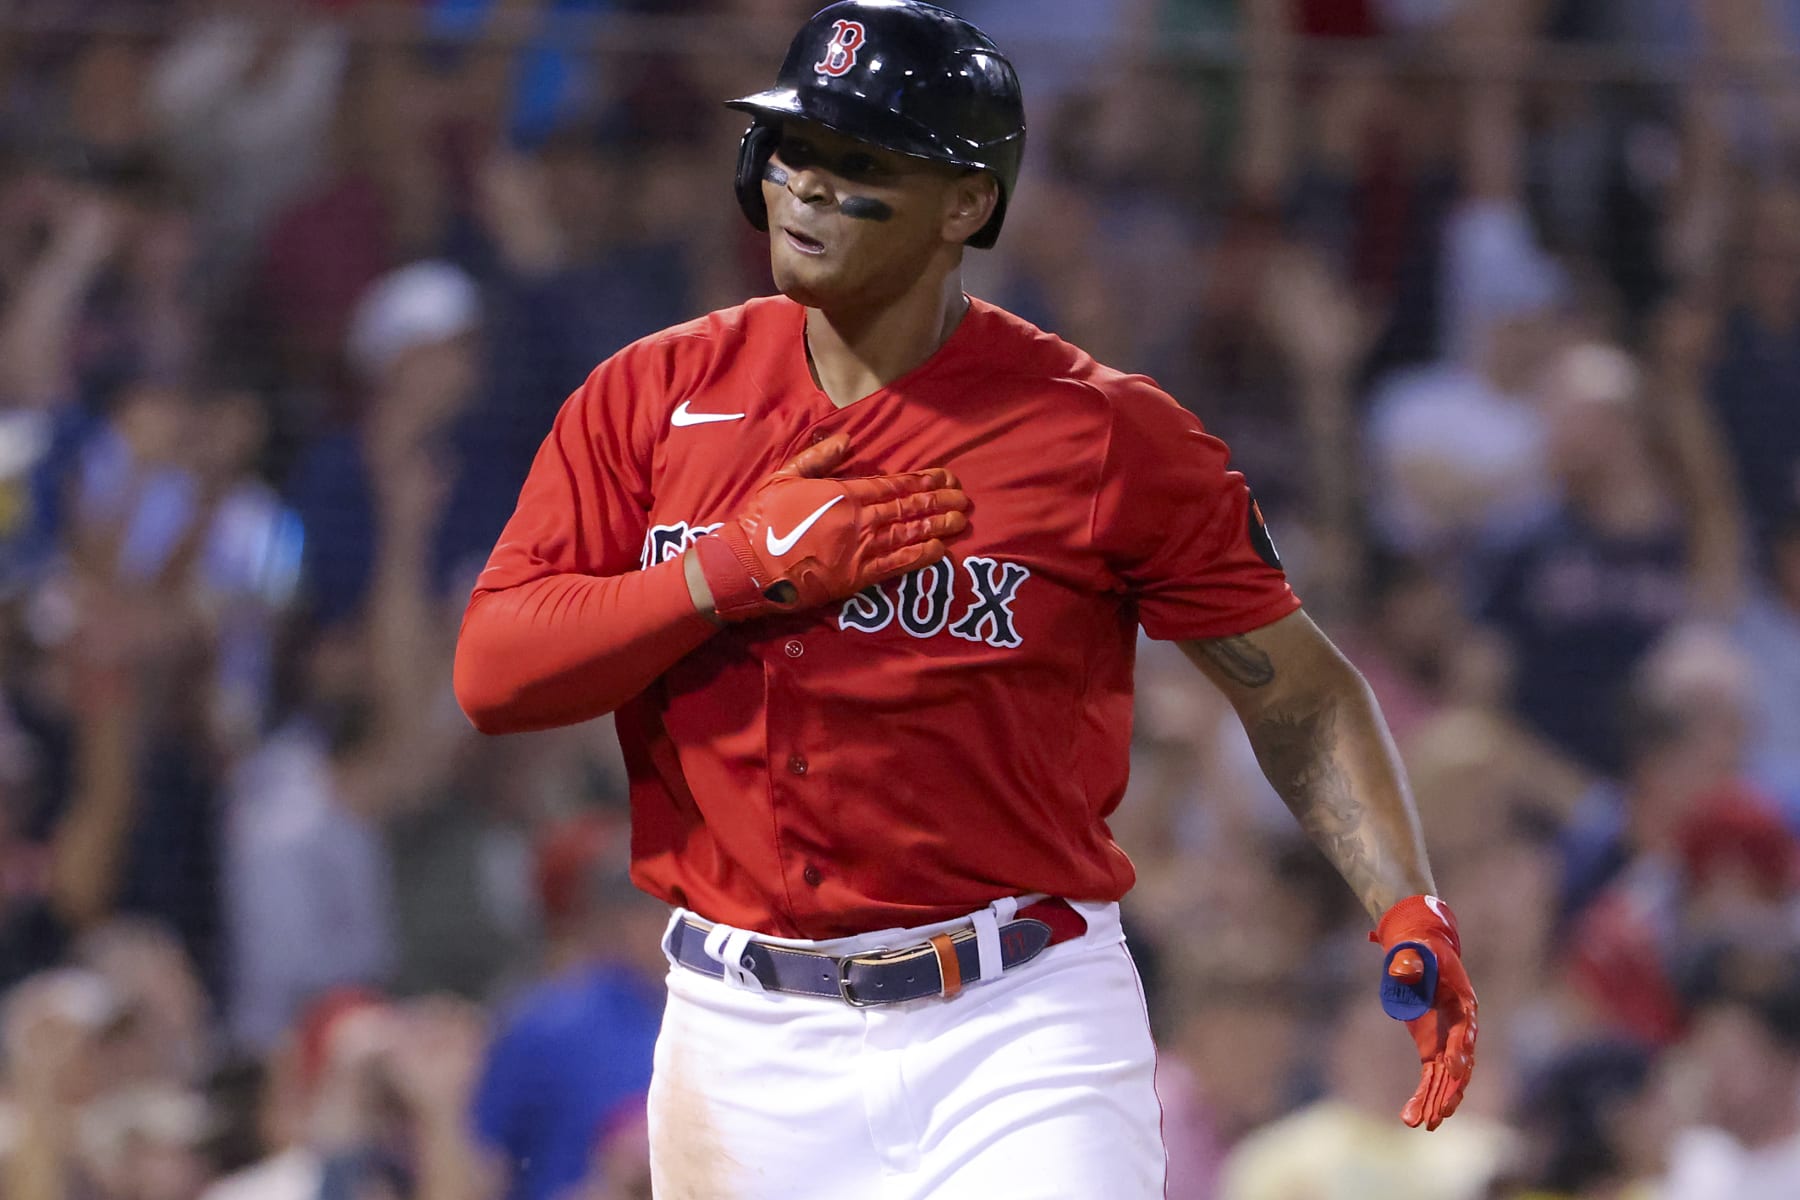 Devers over Betts or Bogaerts? Making sense of Red Sox deal - ESPN